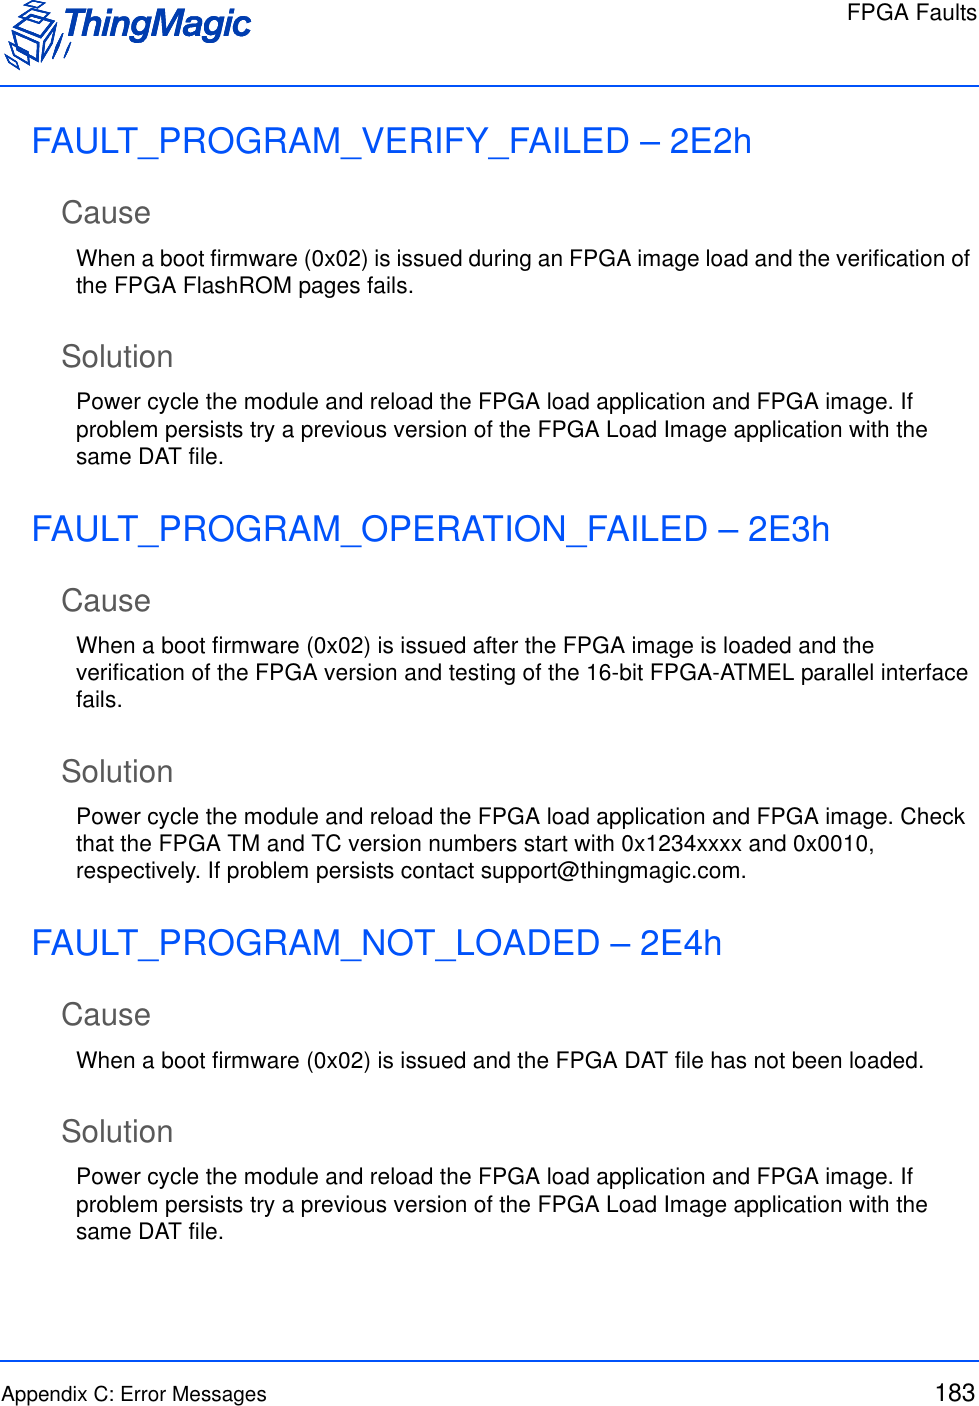 FPGA FaultsAppendix C: Error Messages 183FAULT_PROGRAM_VERIFY_FAILED – 2E2hCauseWhen a boot firmware (0x02) is issued during an FPGA image load and the verification of the FPGA FlashROM pages fails.SolutionPower cycle the module and reload the FPGA load application and FPGA image. If problem persists try a previous version of the FPGA Load Image application with the same DAT file.FAULT_PROGRAM_OPERATION_FAILED – 2E3hCauseWhen a boot firmware (0x02) is issued after the FPGA image is loaded and the verification of the FPGA version and testing of the 16-bit FPGA-ATMEL parallel interface fails.SolutionPower cycle the module and reload the FPGA load application and FPGA image. Check that the FPGA TM and TC version numbers start with 0x1234xxxx and 0x0010, respectively. If problem persists contact support@thingmagic.com.FAULT_PROGRAM_NOT_LOADED – 2E4hCauseWhen a boot firmware (0x02) is issued and the FPGA DAT file has not been loaded.SolutionPower cycle the module and reload the FPGA load application and FPGA image. If problem persists try a previous version of the FPGA Load Image application with the same DAT file.